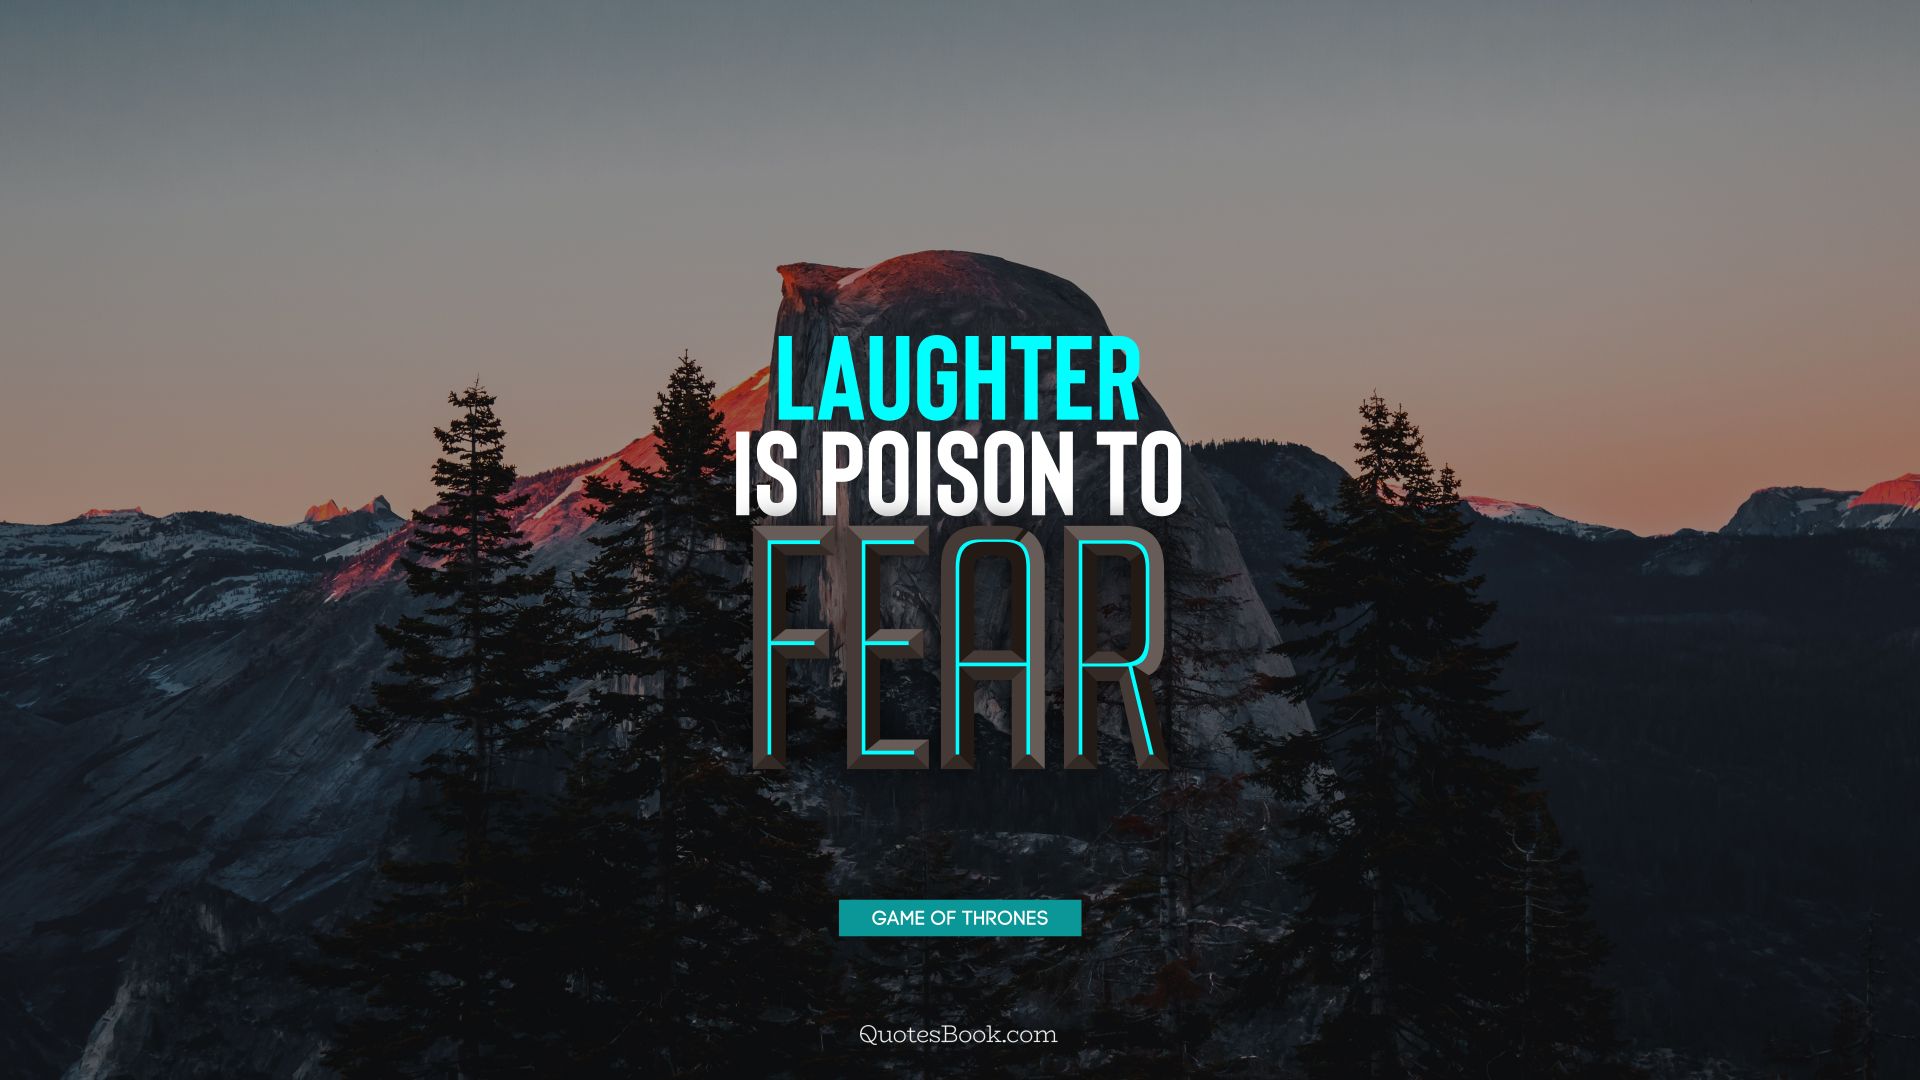 Laughter is poison to fear. - Quote by George R.R. Martin